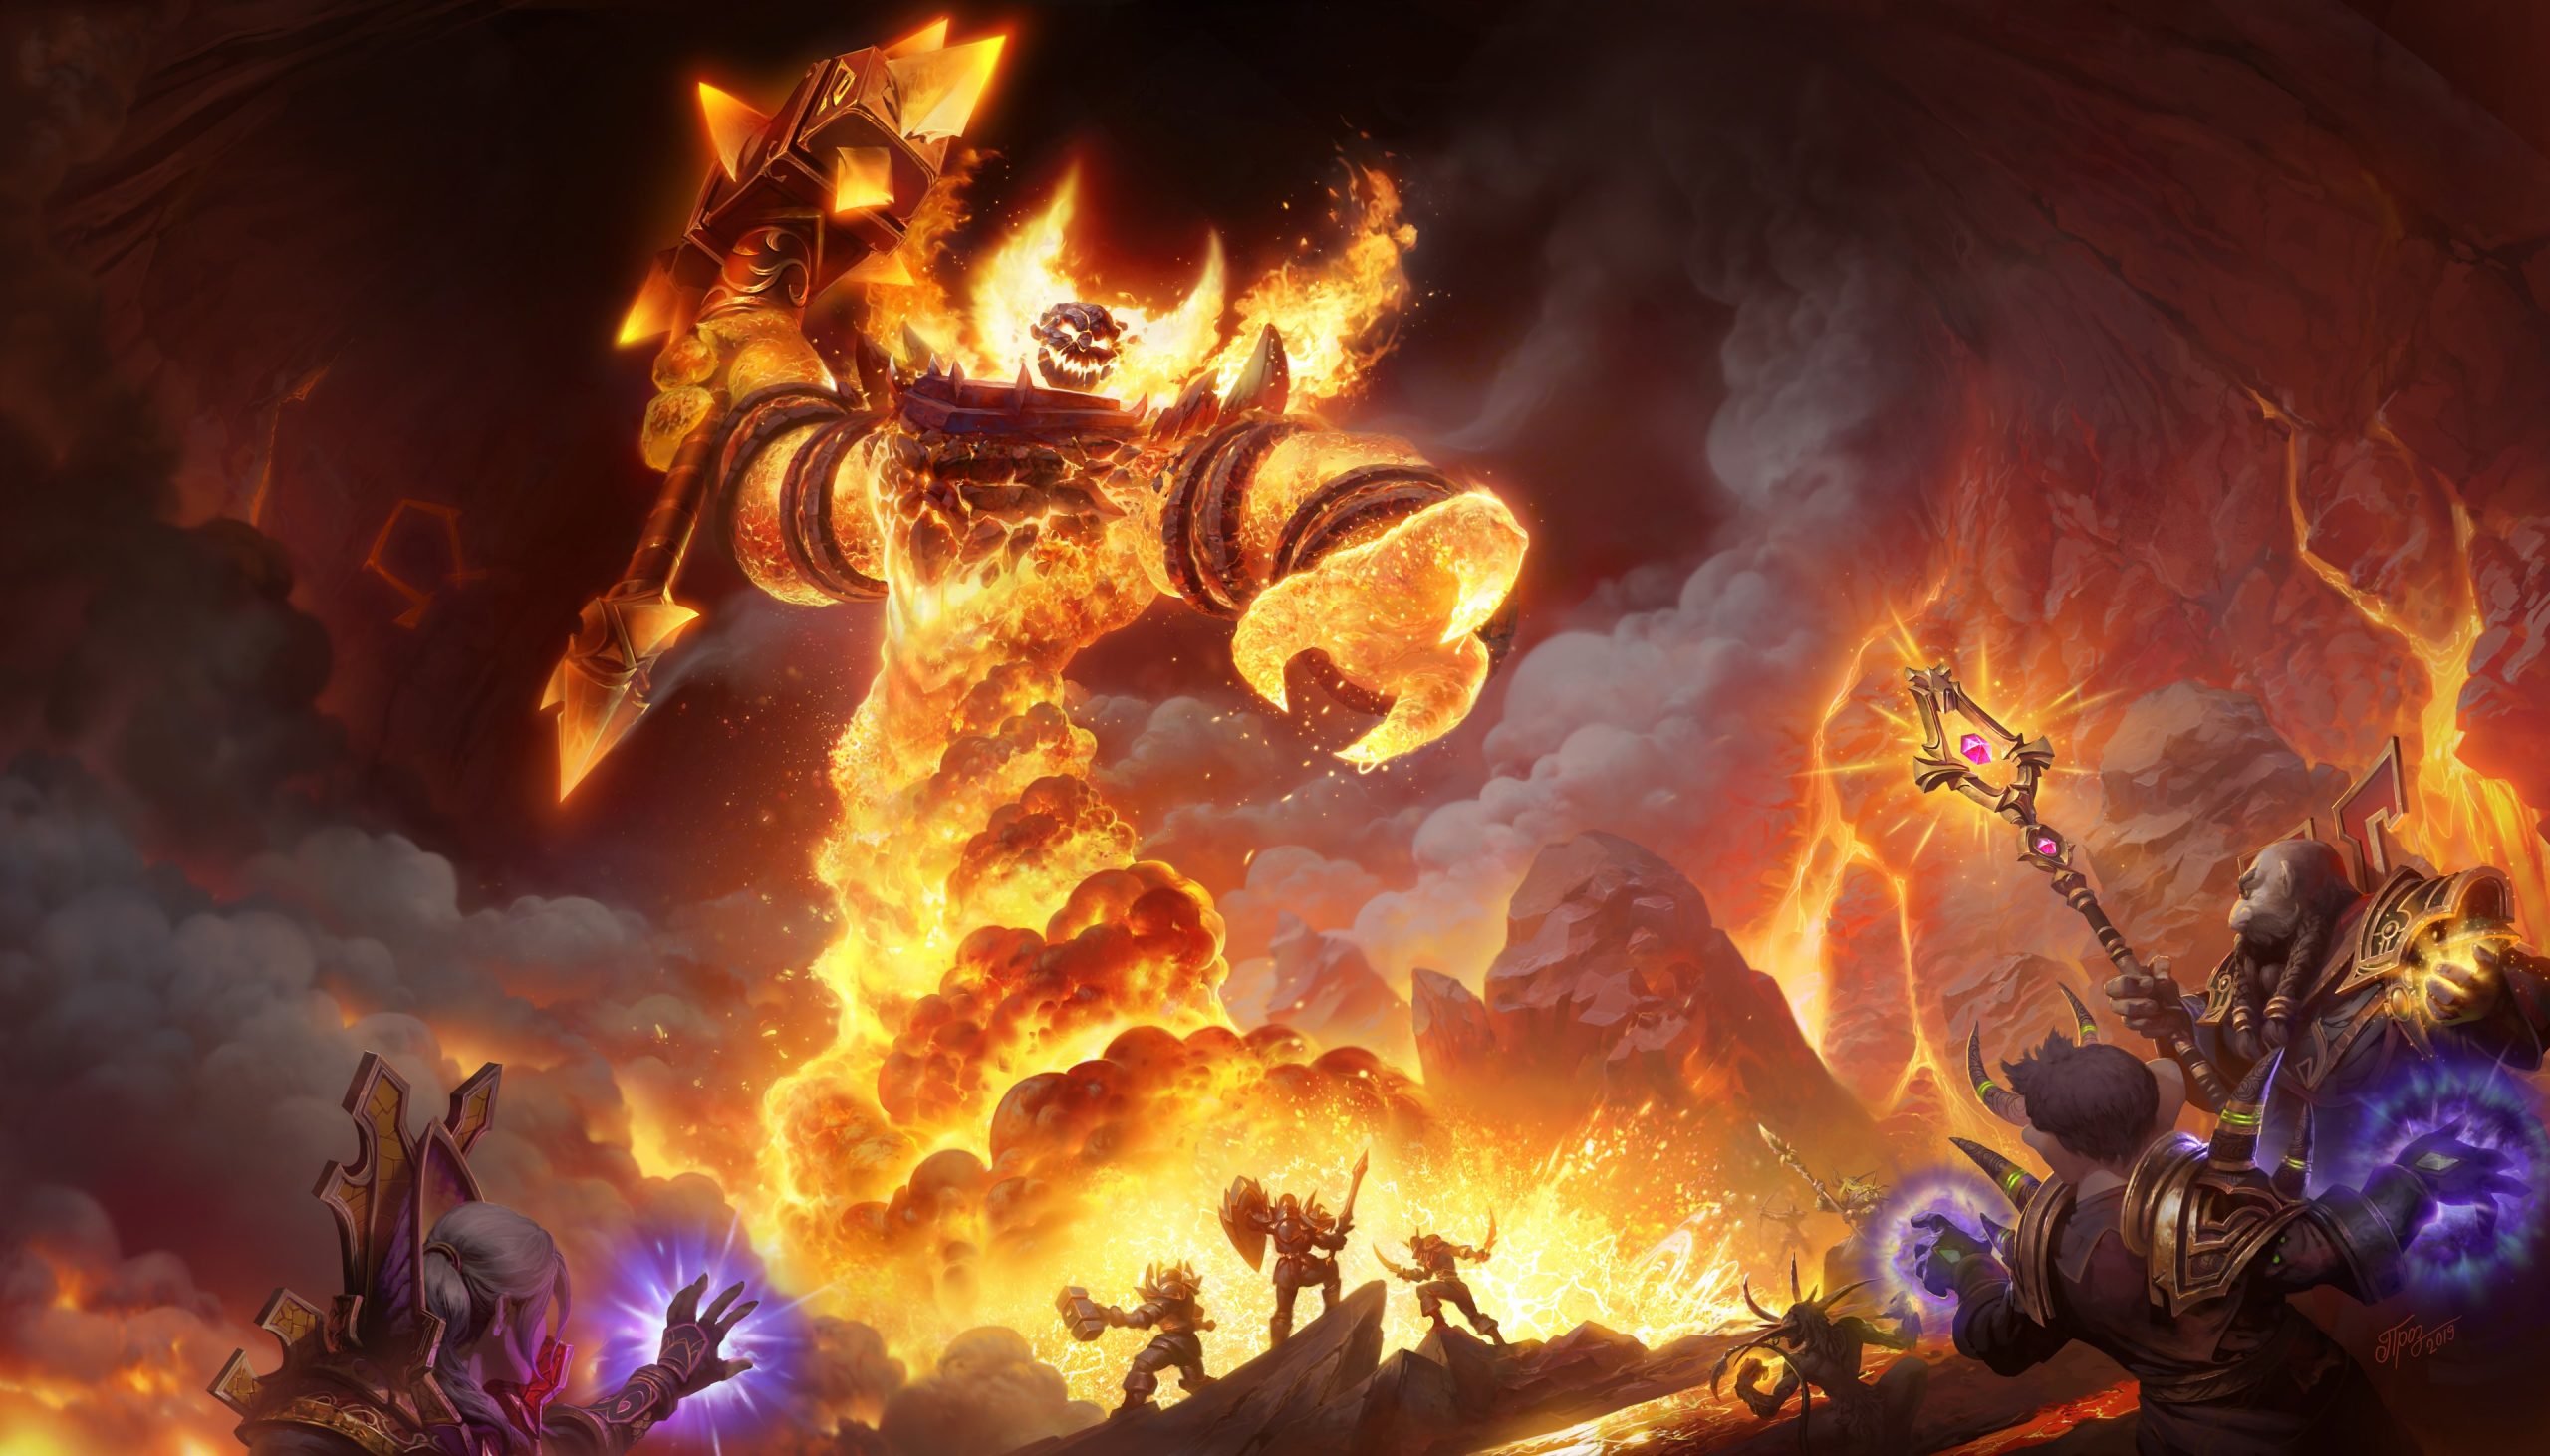 Our favorite World of Warcraft and Diablo art from TamplierPainter